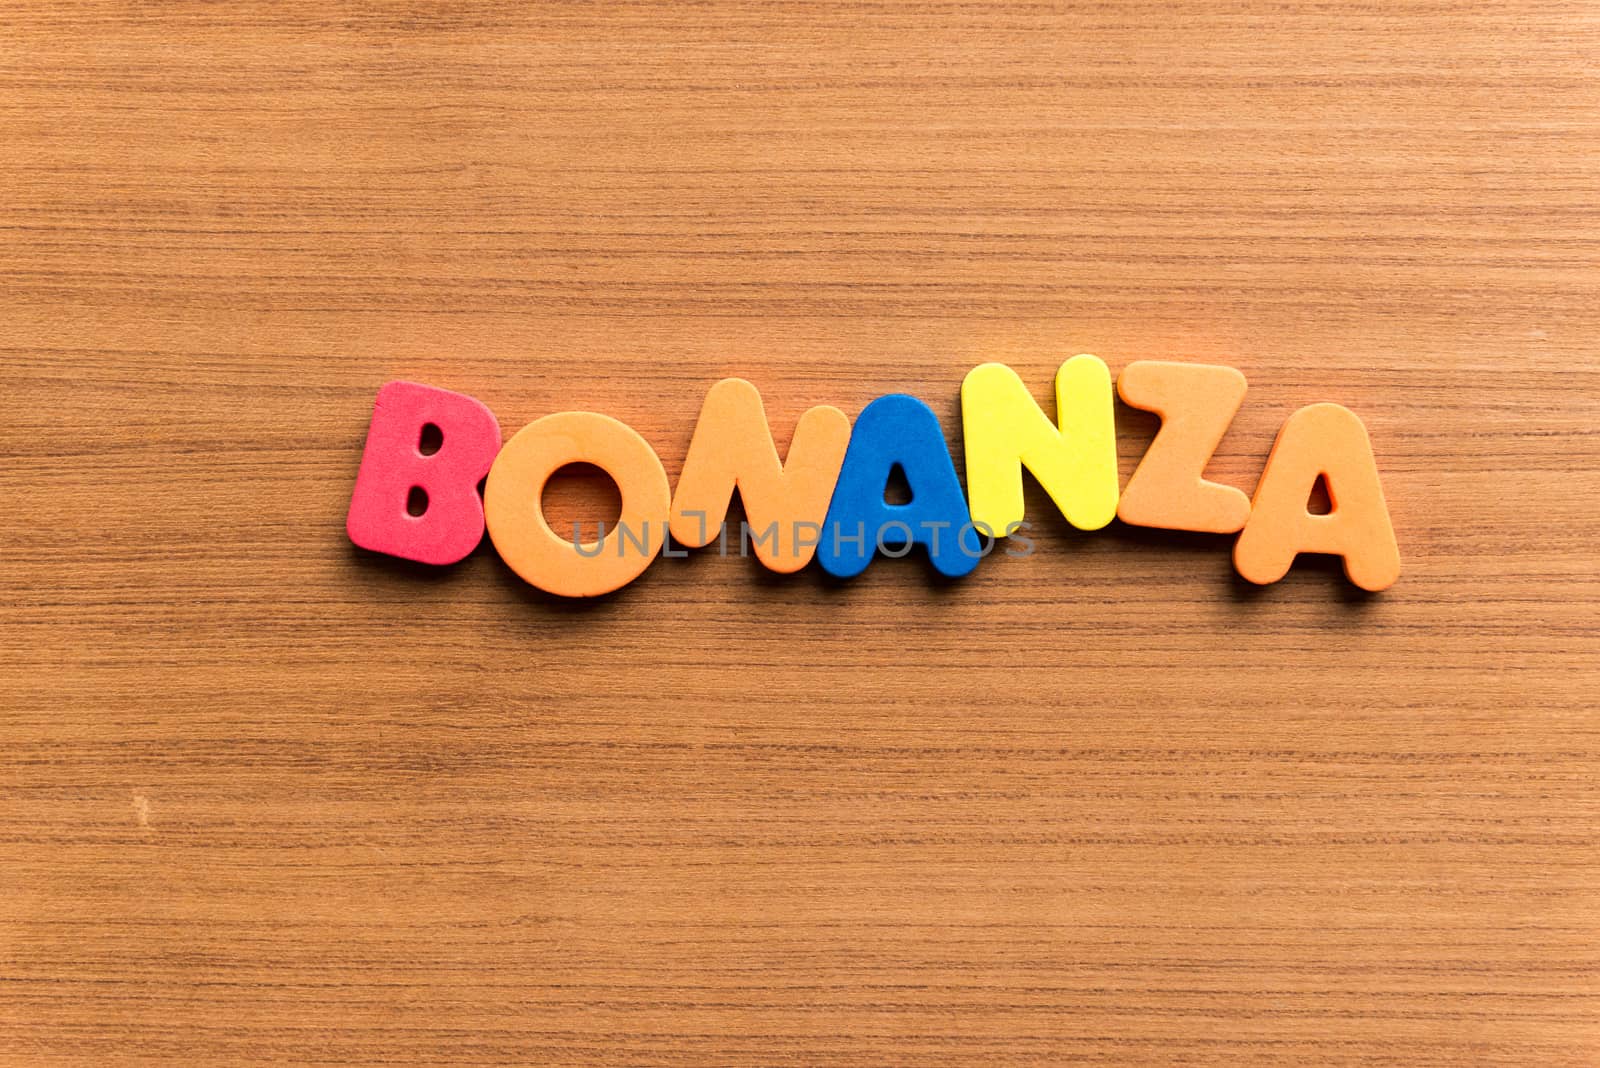 bonanza colorful word on the wooden background